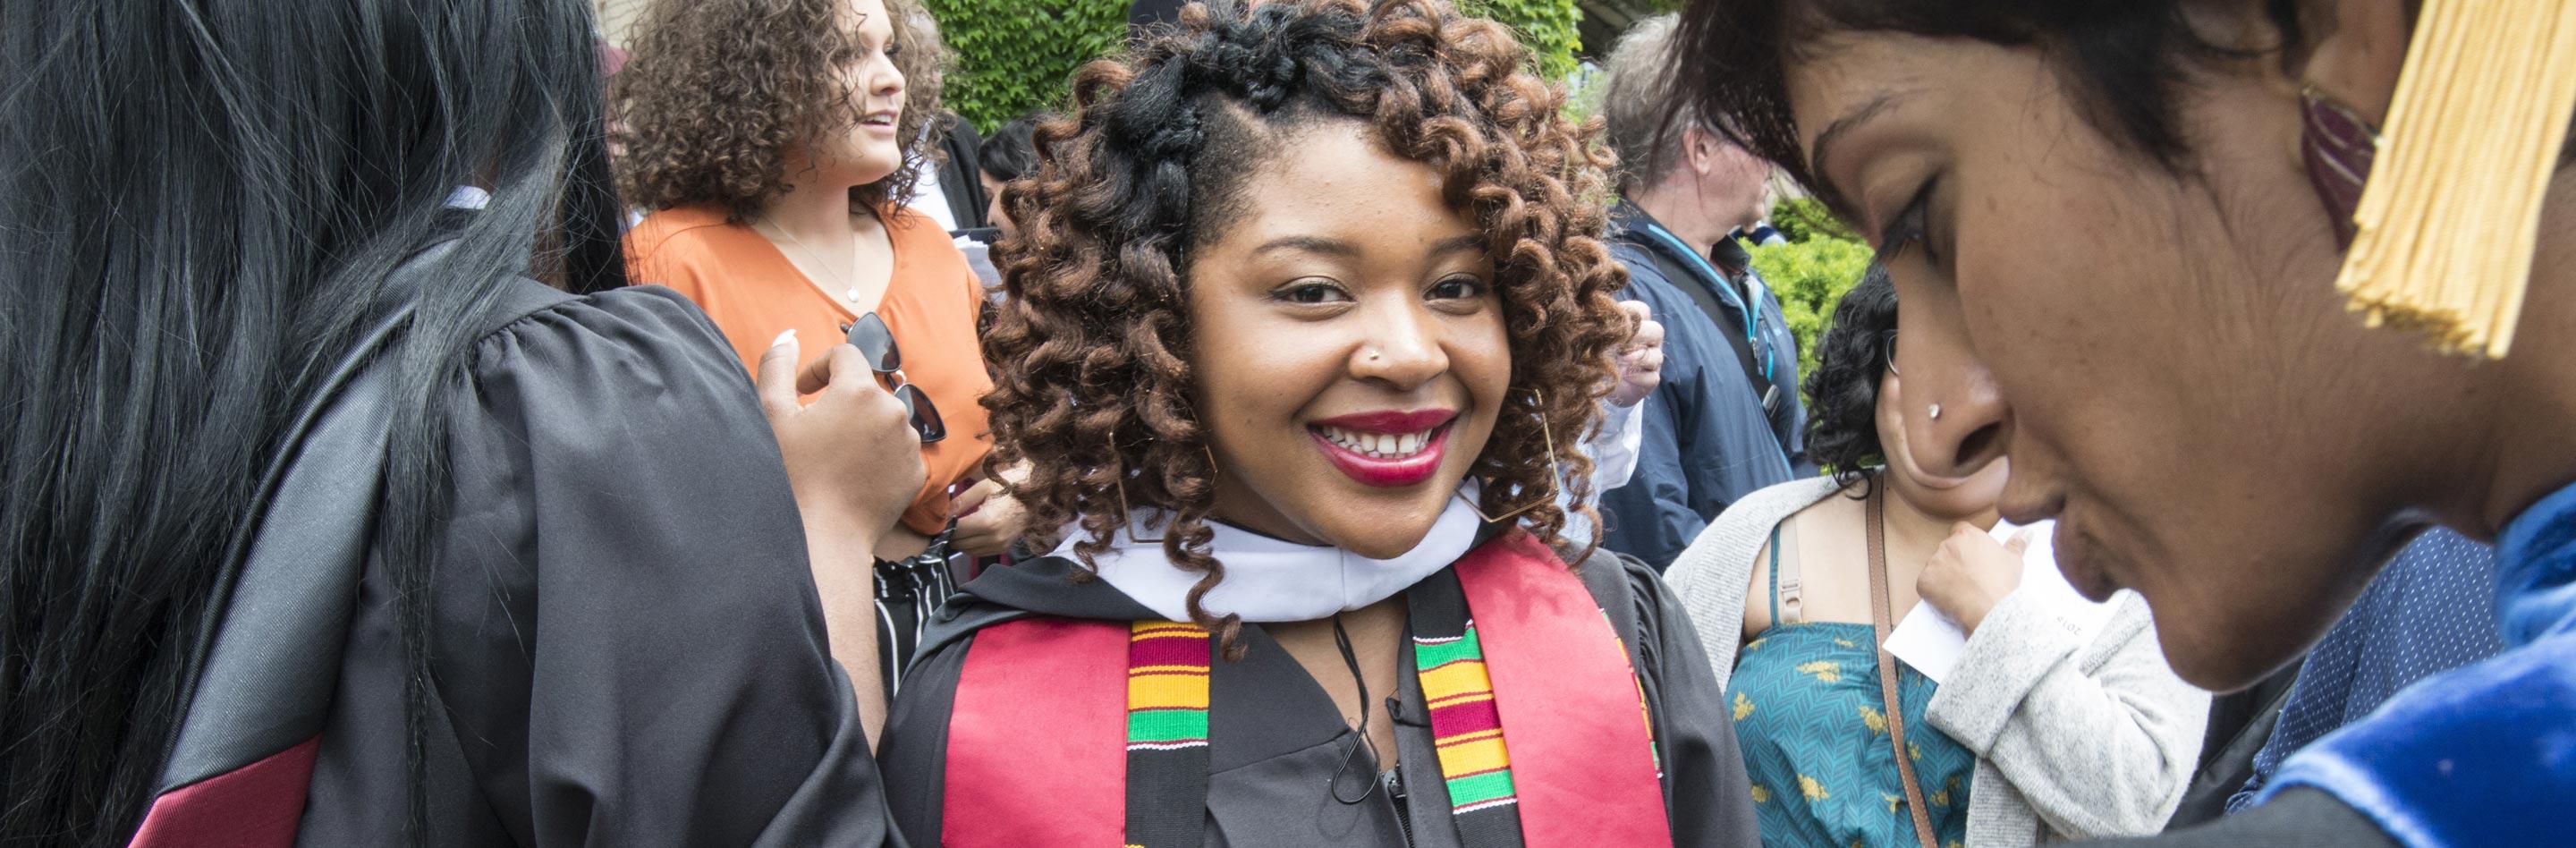 A dark-skinned, curly-haired person in graduation regalia smiling in a group of graduates outside